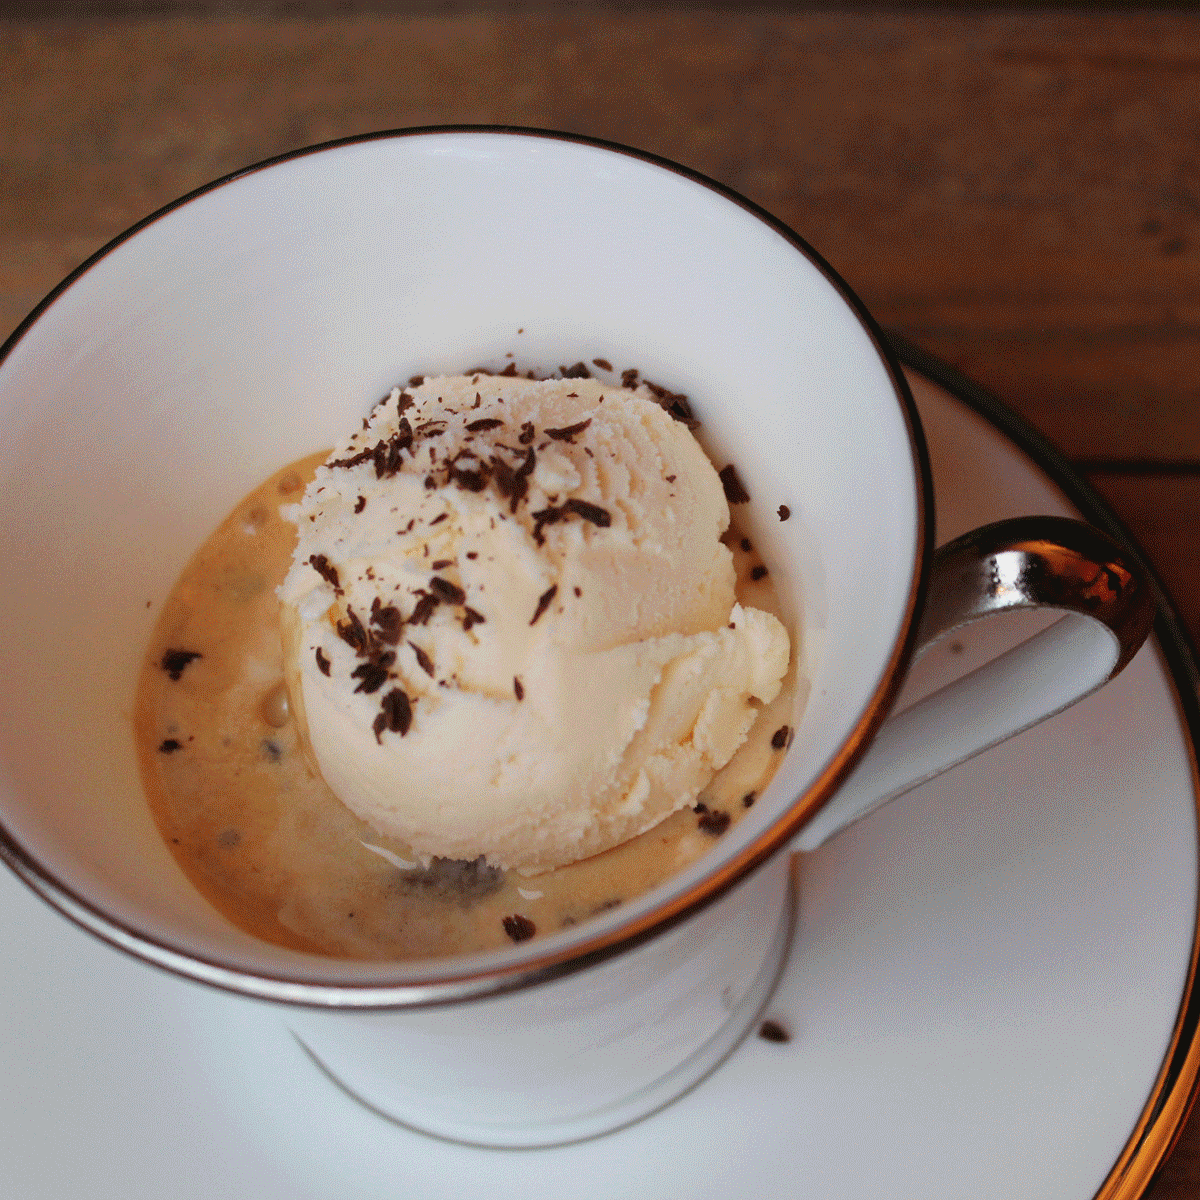 ice cream topped with espresso and shaved chocolate